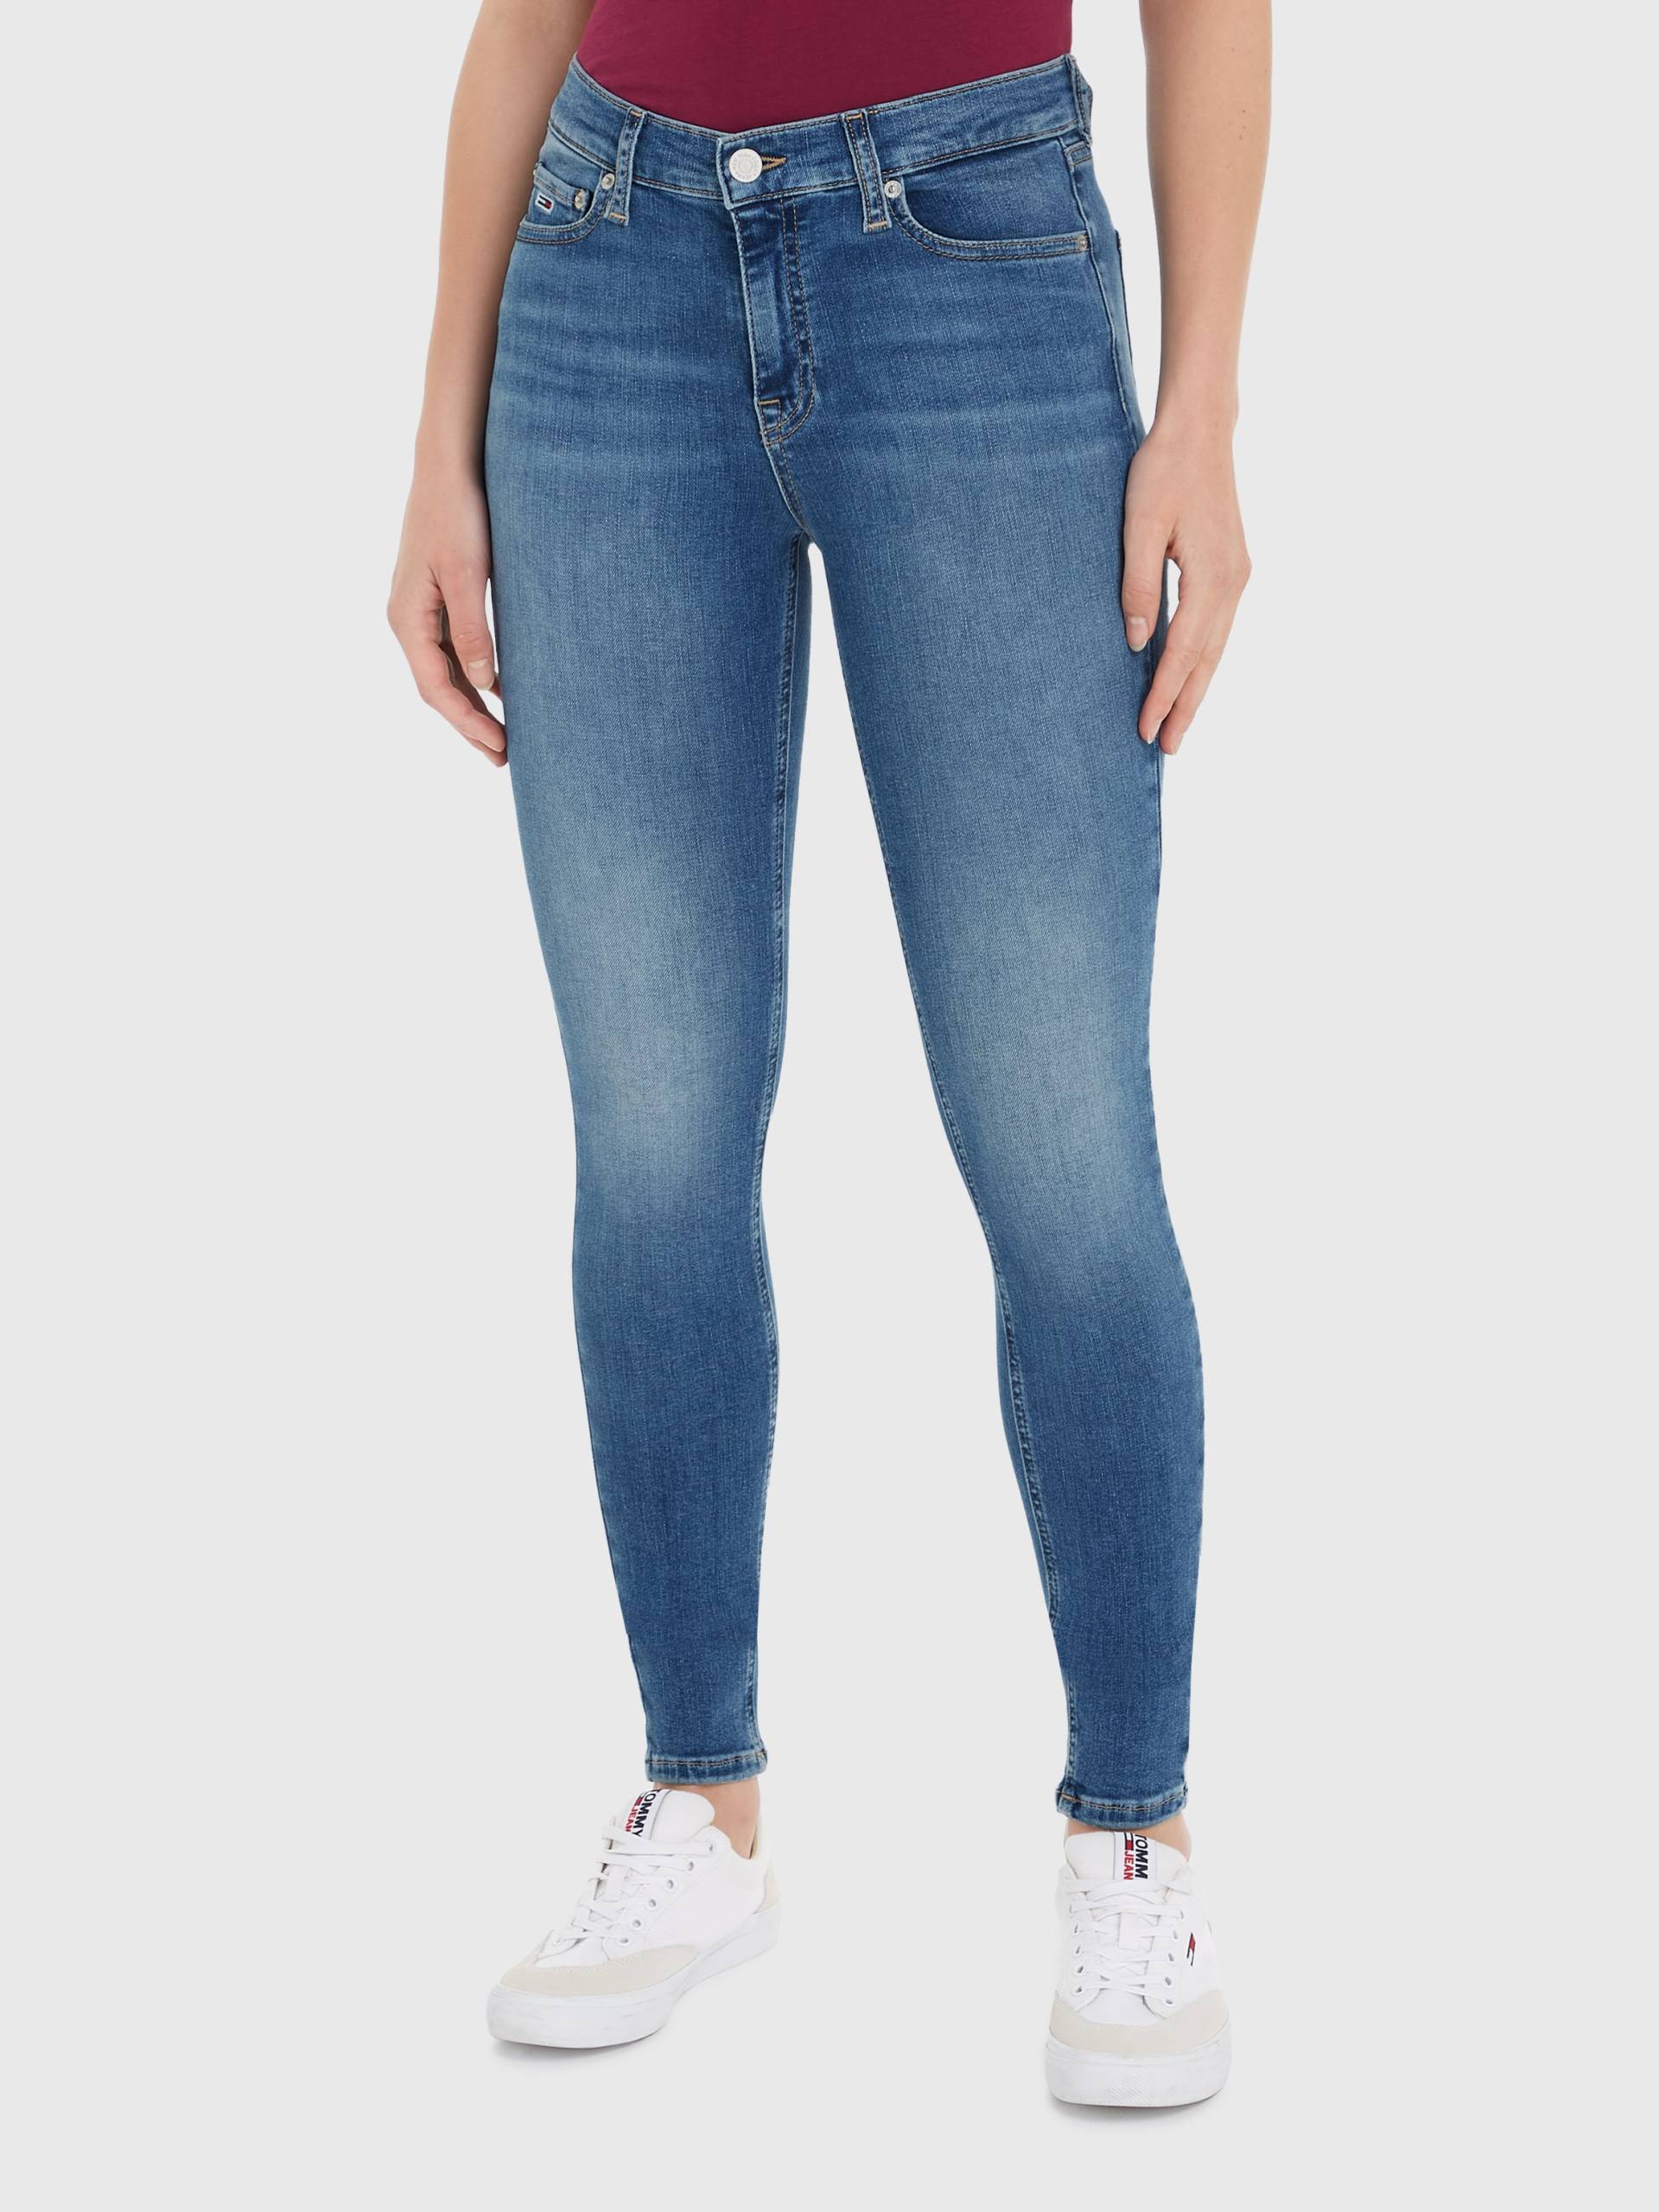 Tommy Jeans Skinny-fit-Jeans »Tommy Jeans - Damenjeans- NORA Mid Rise - Skinny Fit«, Röhrenjeans mit Faded-out Effekt, washed out Tommy Jeans Logo-Badge von Tommy Jeans